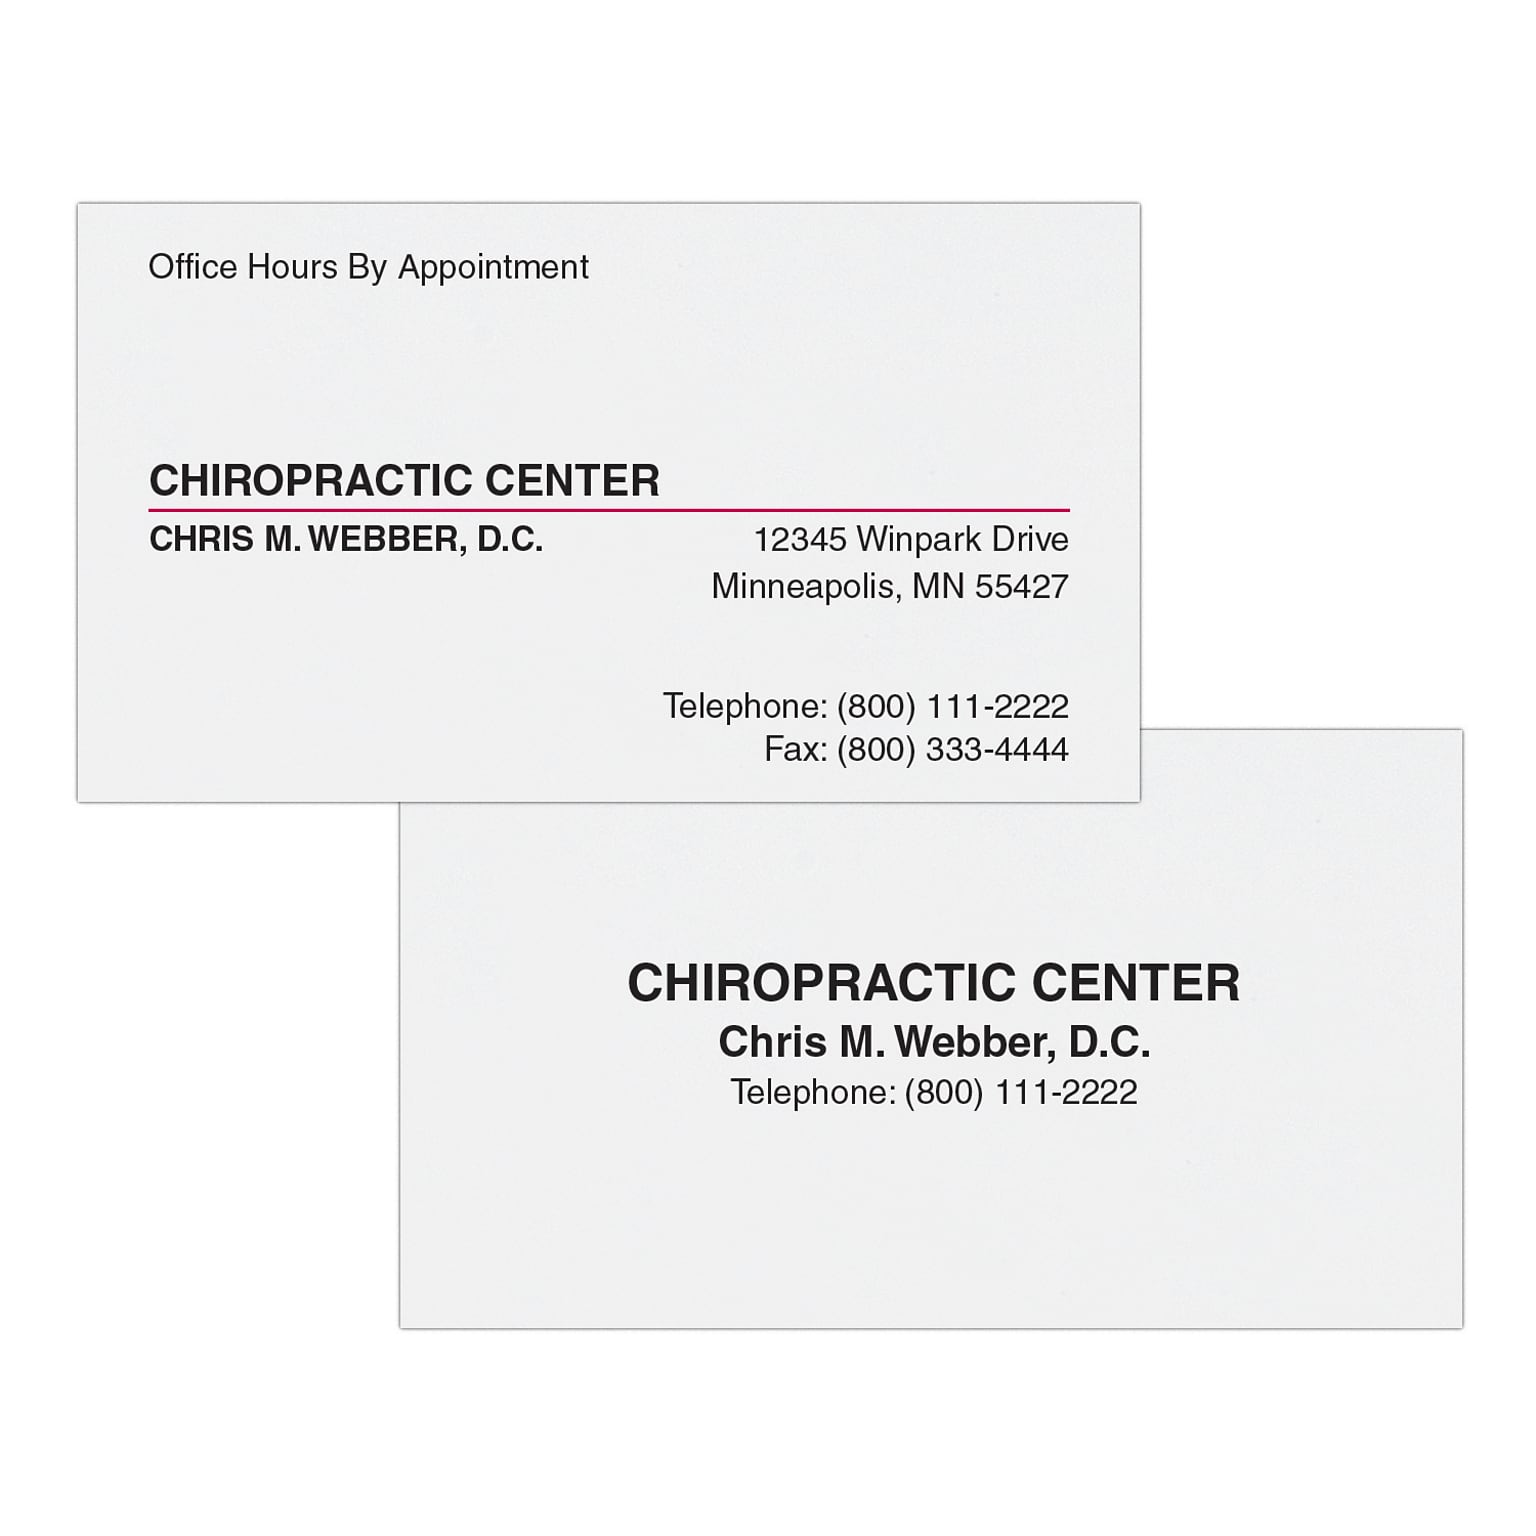 Custom 1-2 Color Appointment Cards, White Vellum 80#, Flat Print, 2 Standard Inks, 2-Sided, 250/Pk